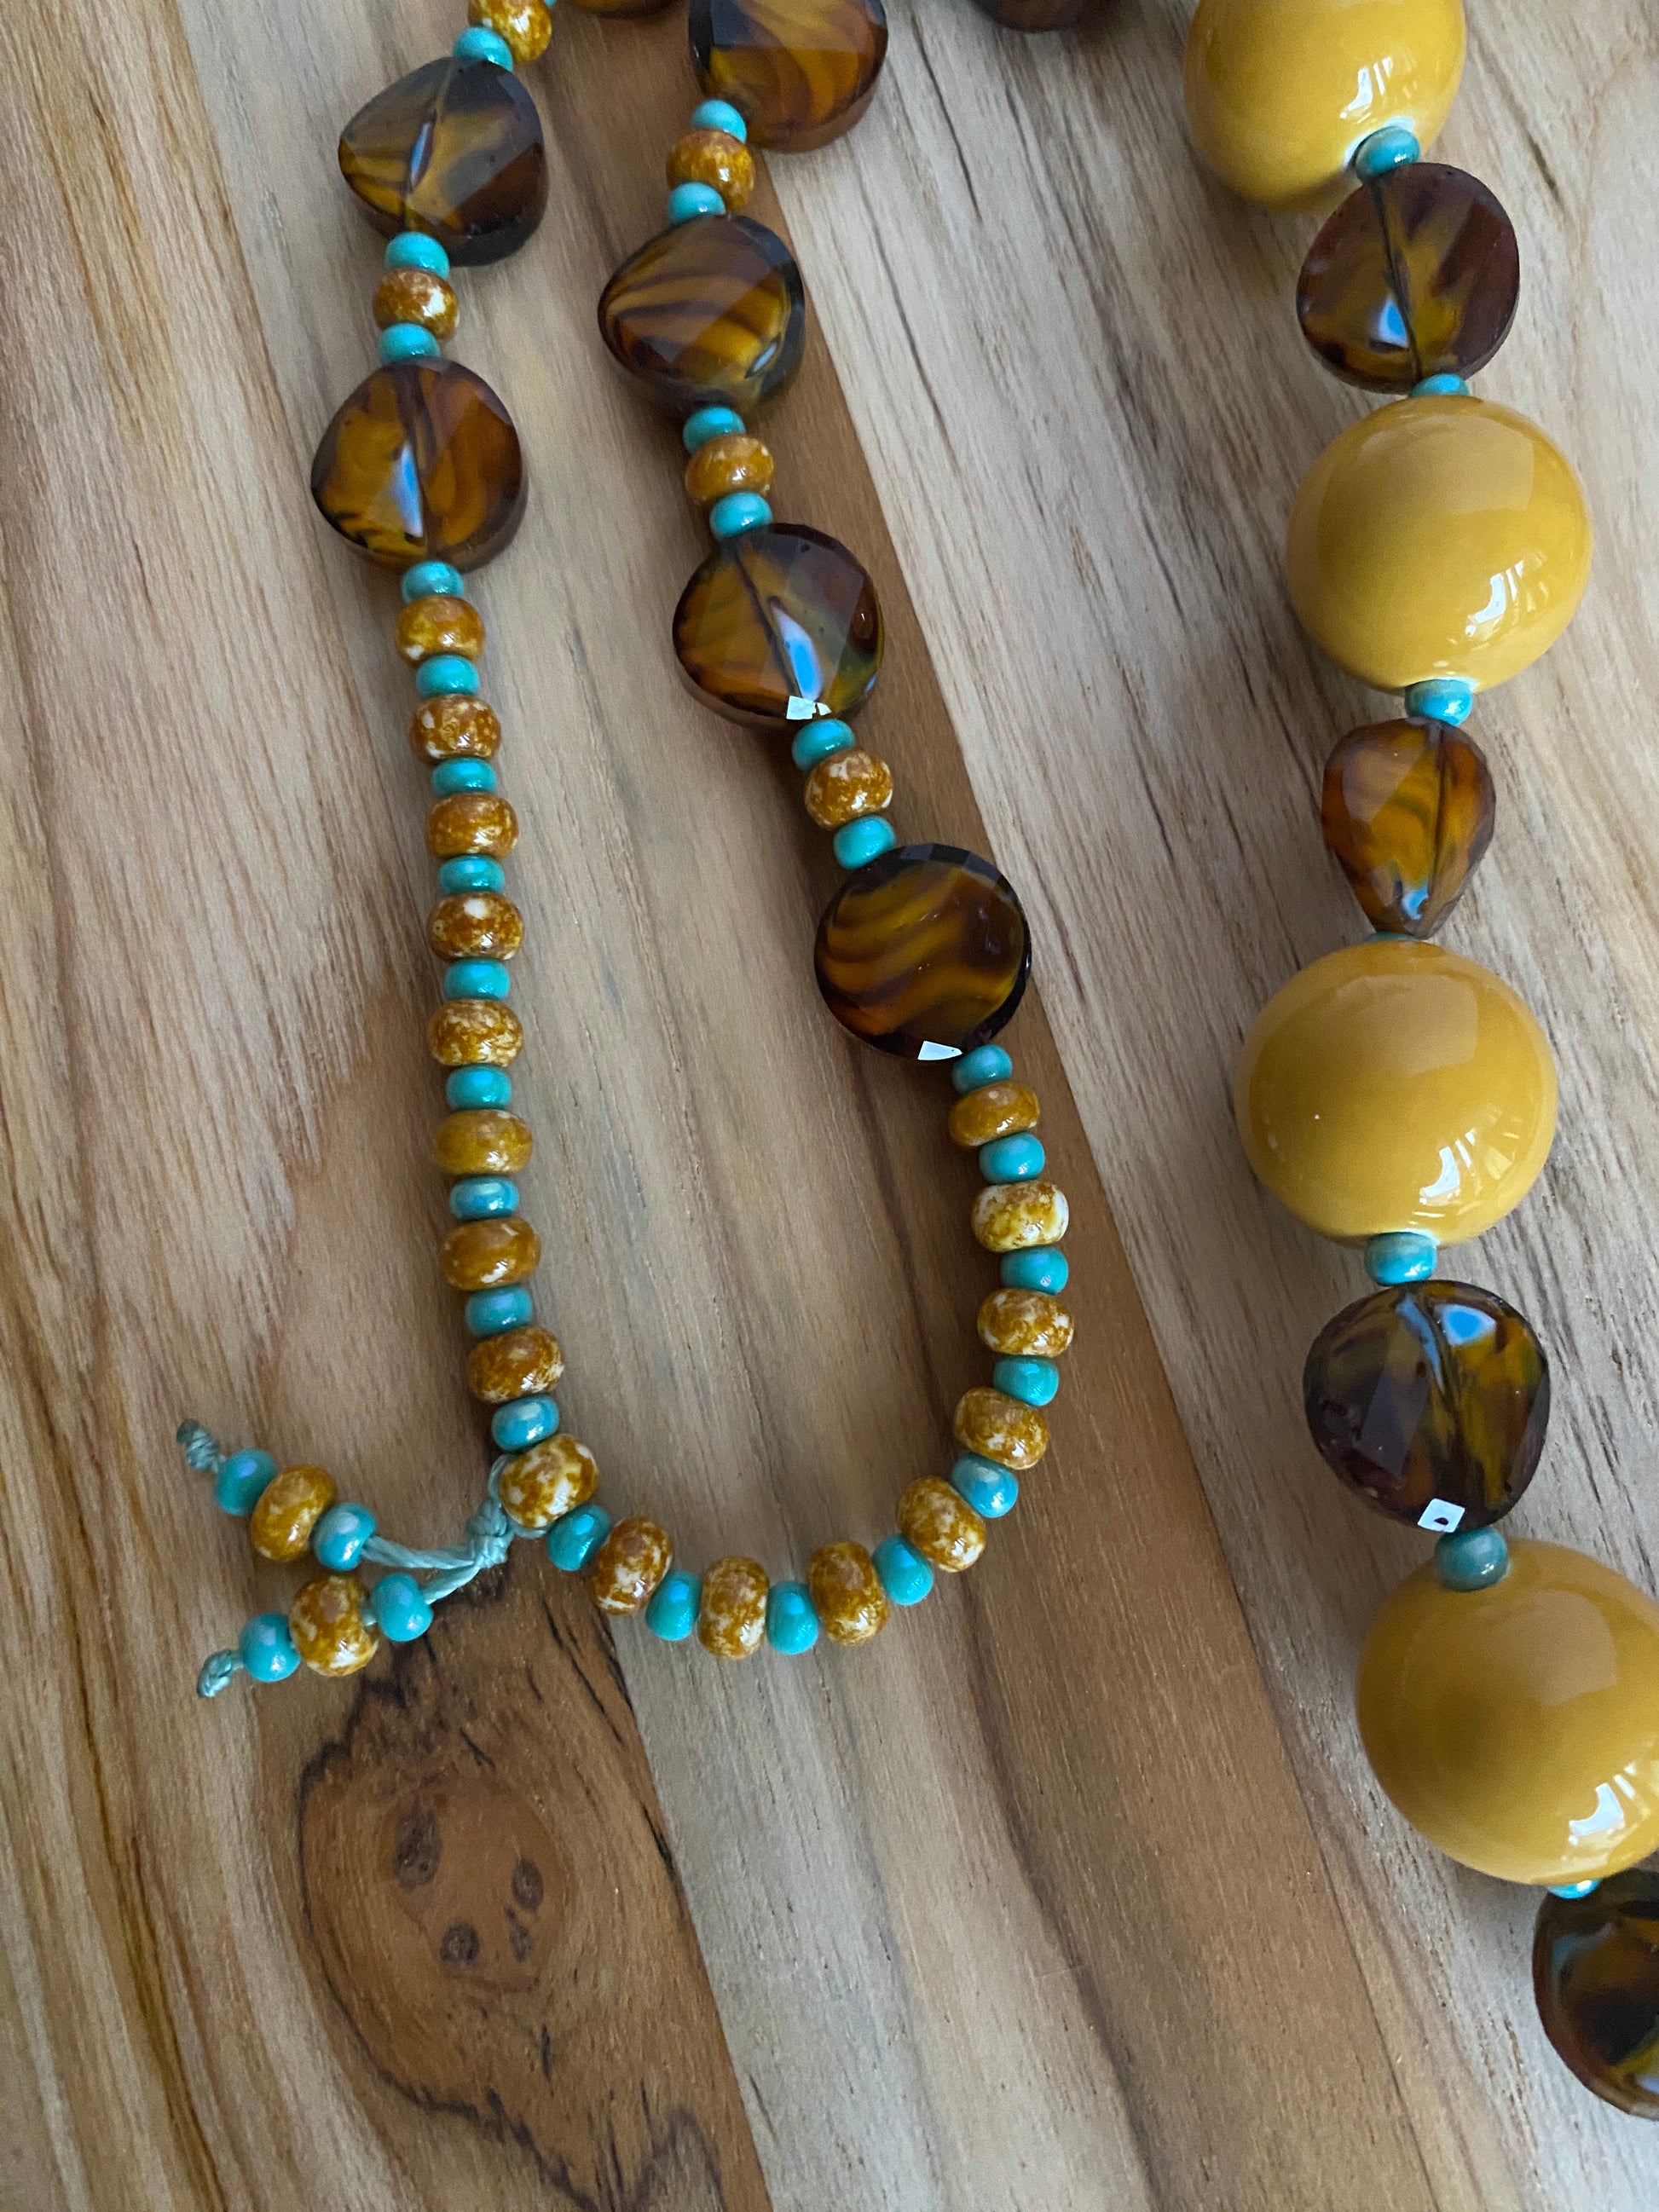 28" Mustard Yellow Ceramic Beaded Necklace with Brown and Turquoise Glass and Seed Beads - My Urban Gems